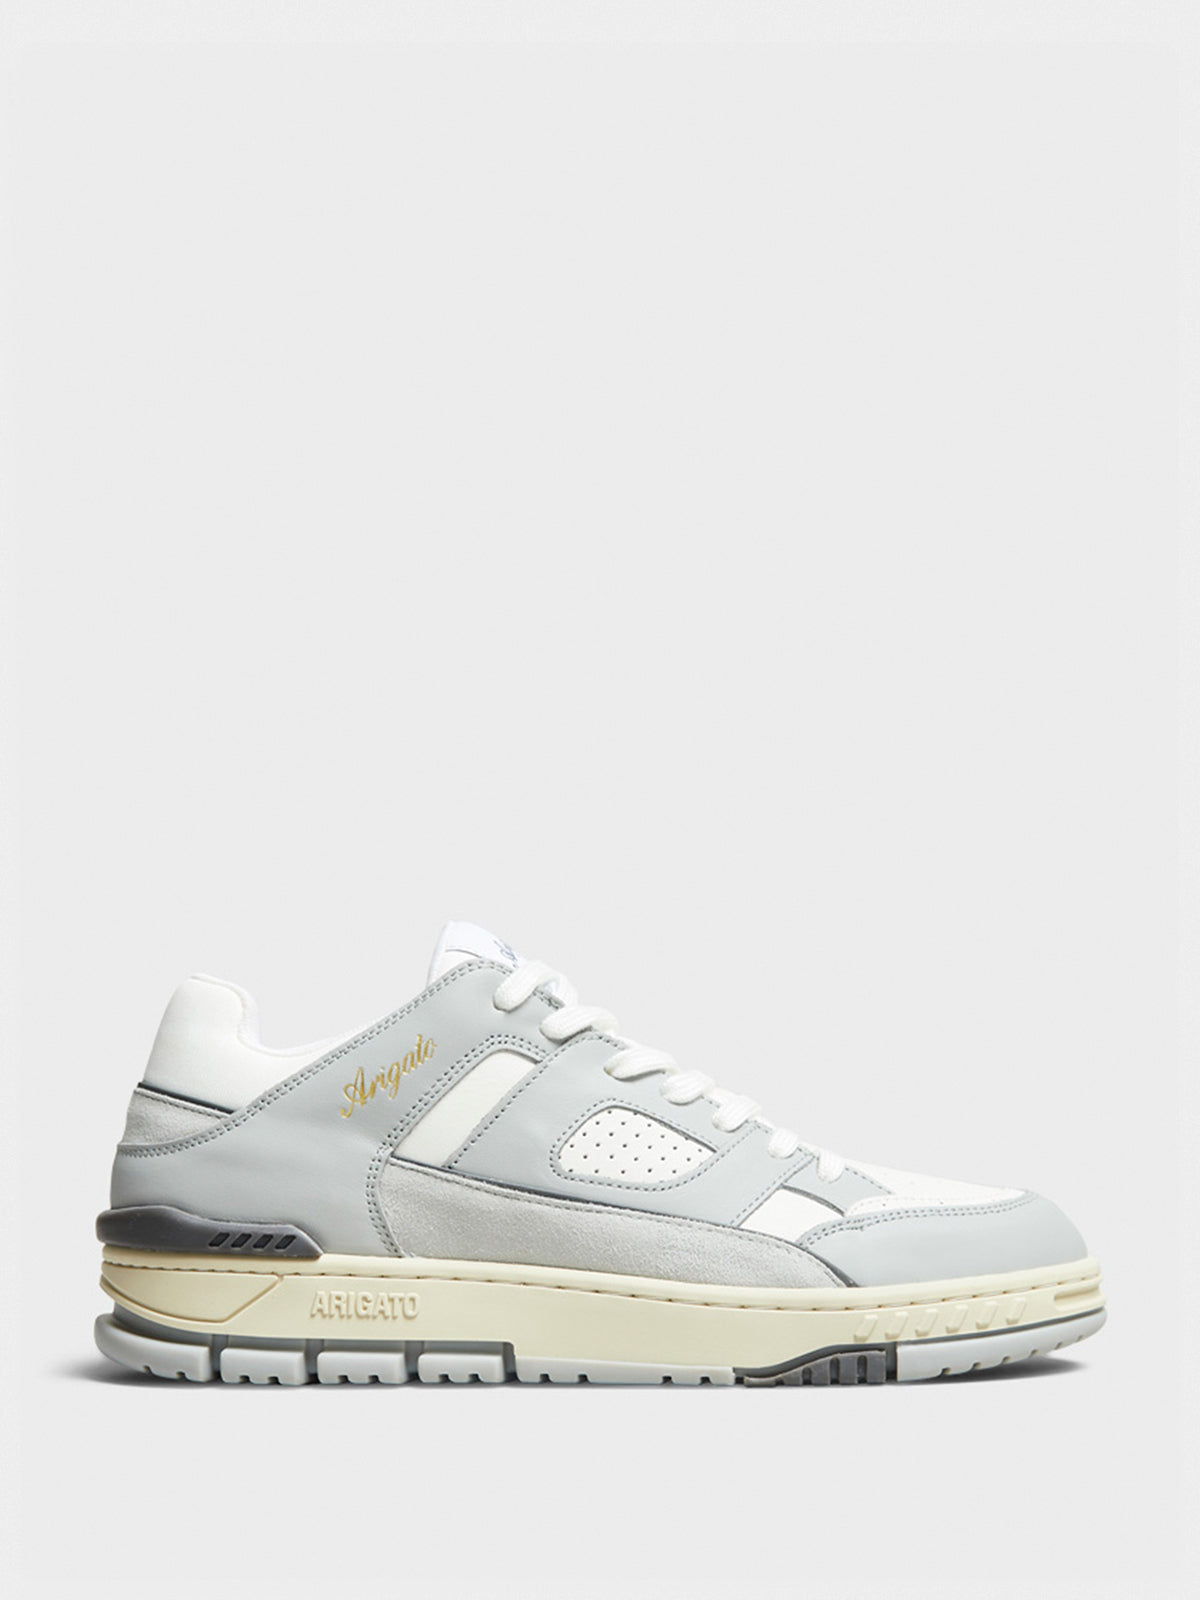 Area Lo Sneakers in Grey and White